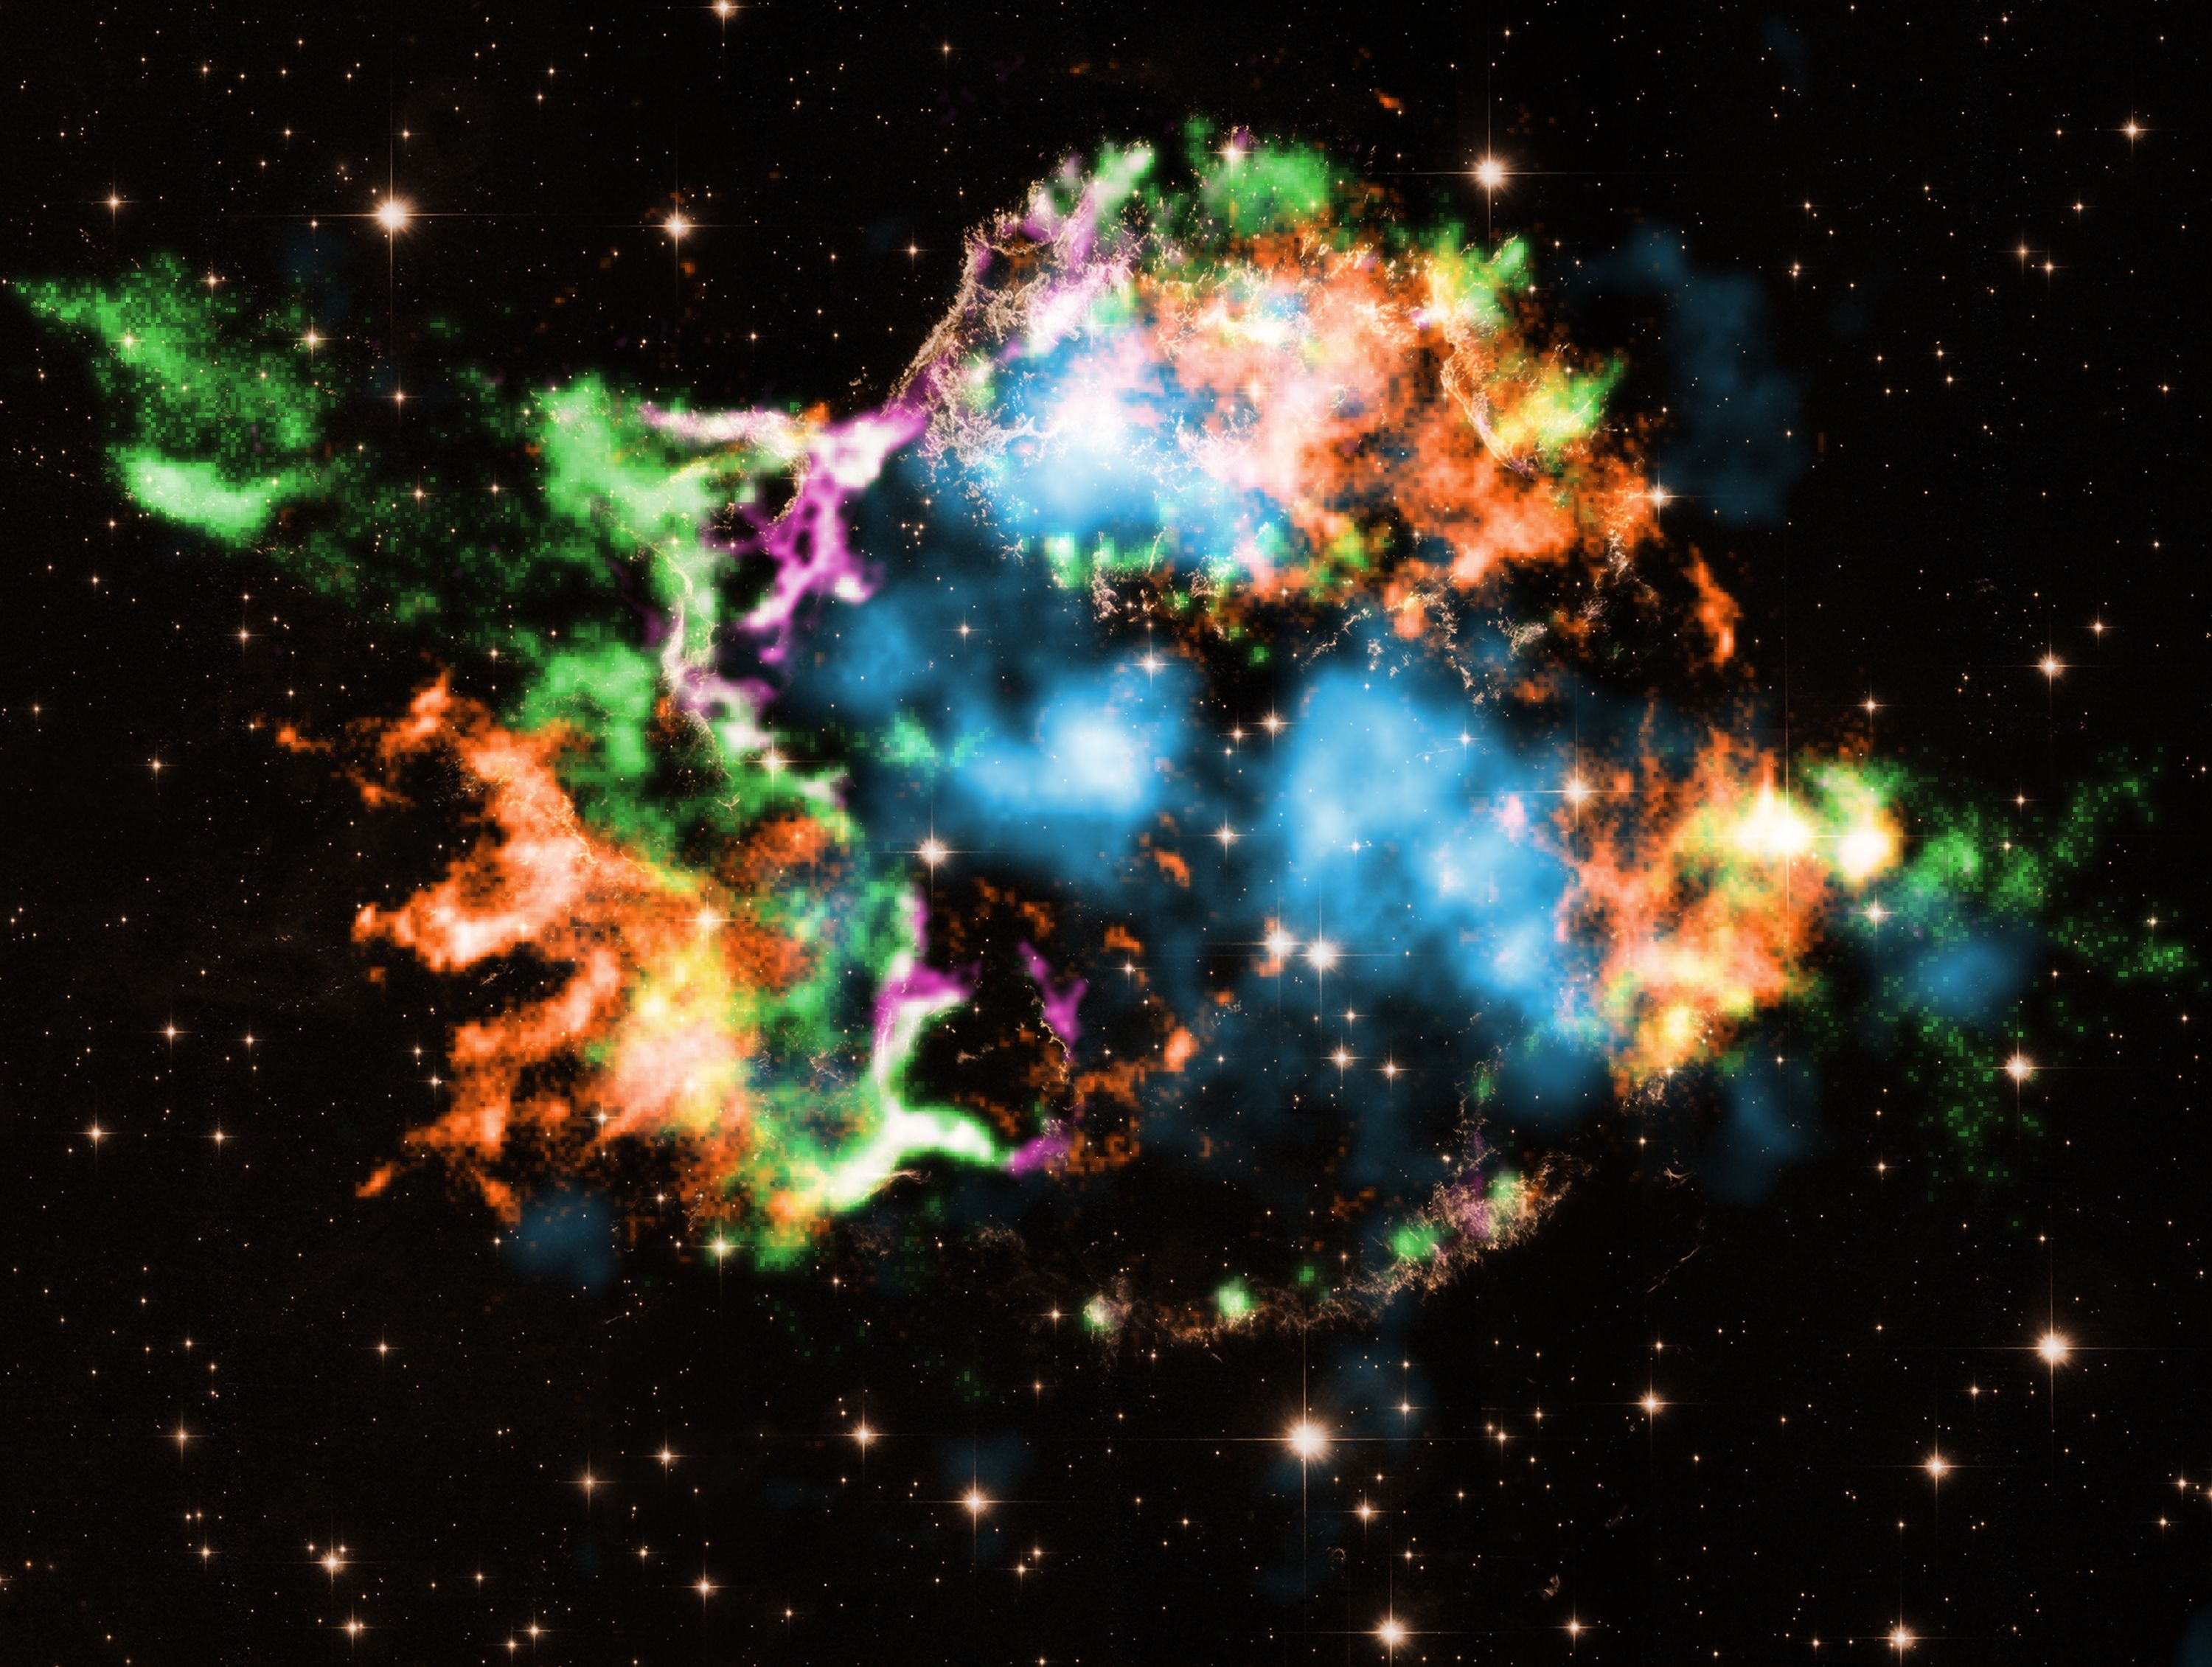 Supernova remnant is source of extreme cosmic particles